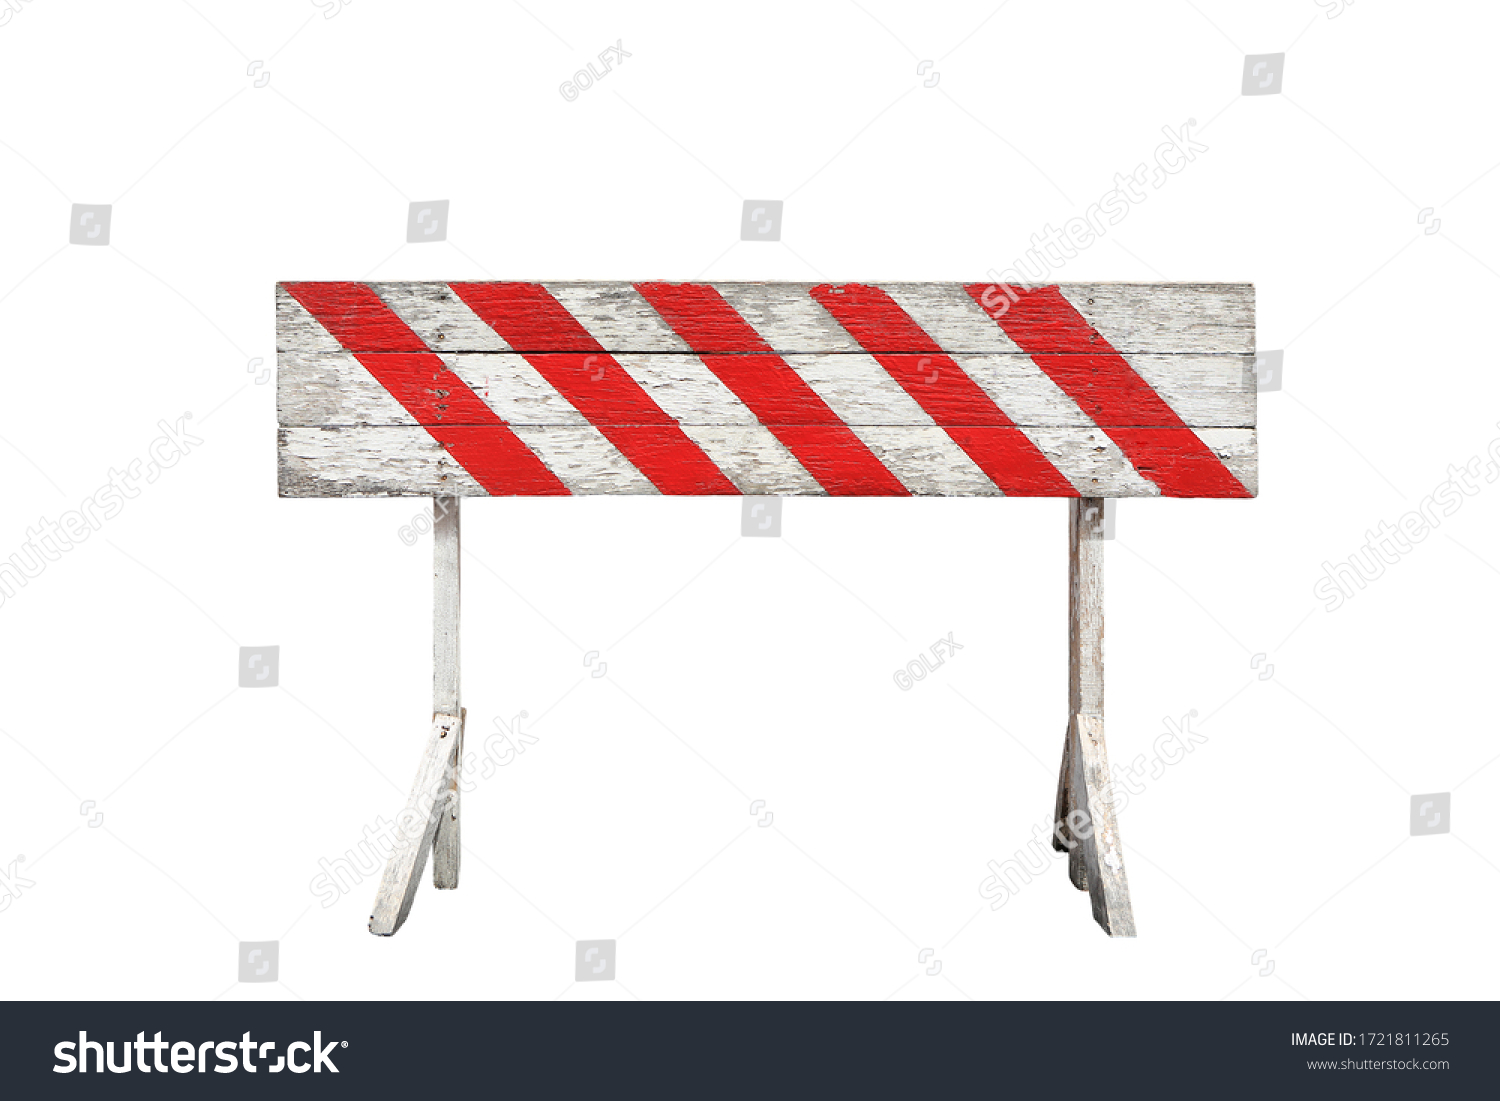 red and white striped on wooden panel barrier isolated on white background. the ban sign painted on wood plank and stand #1721811265